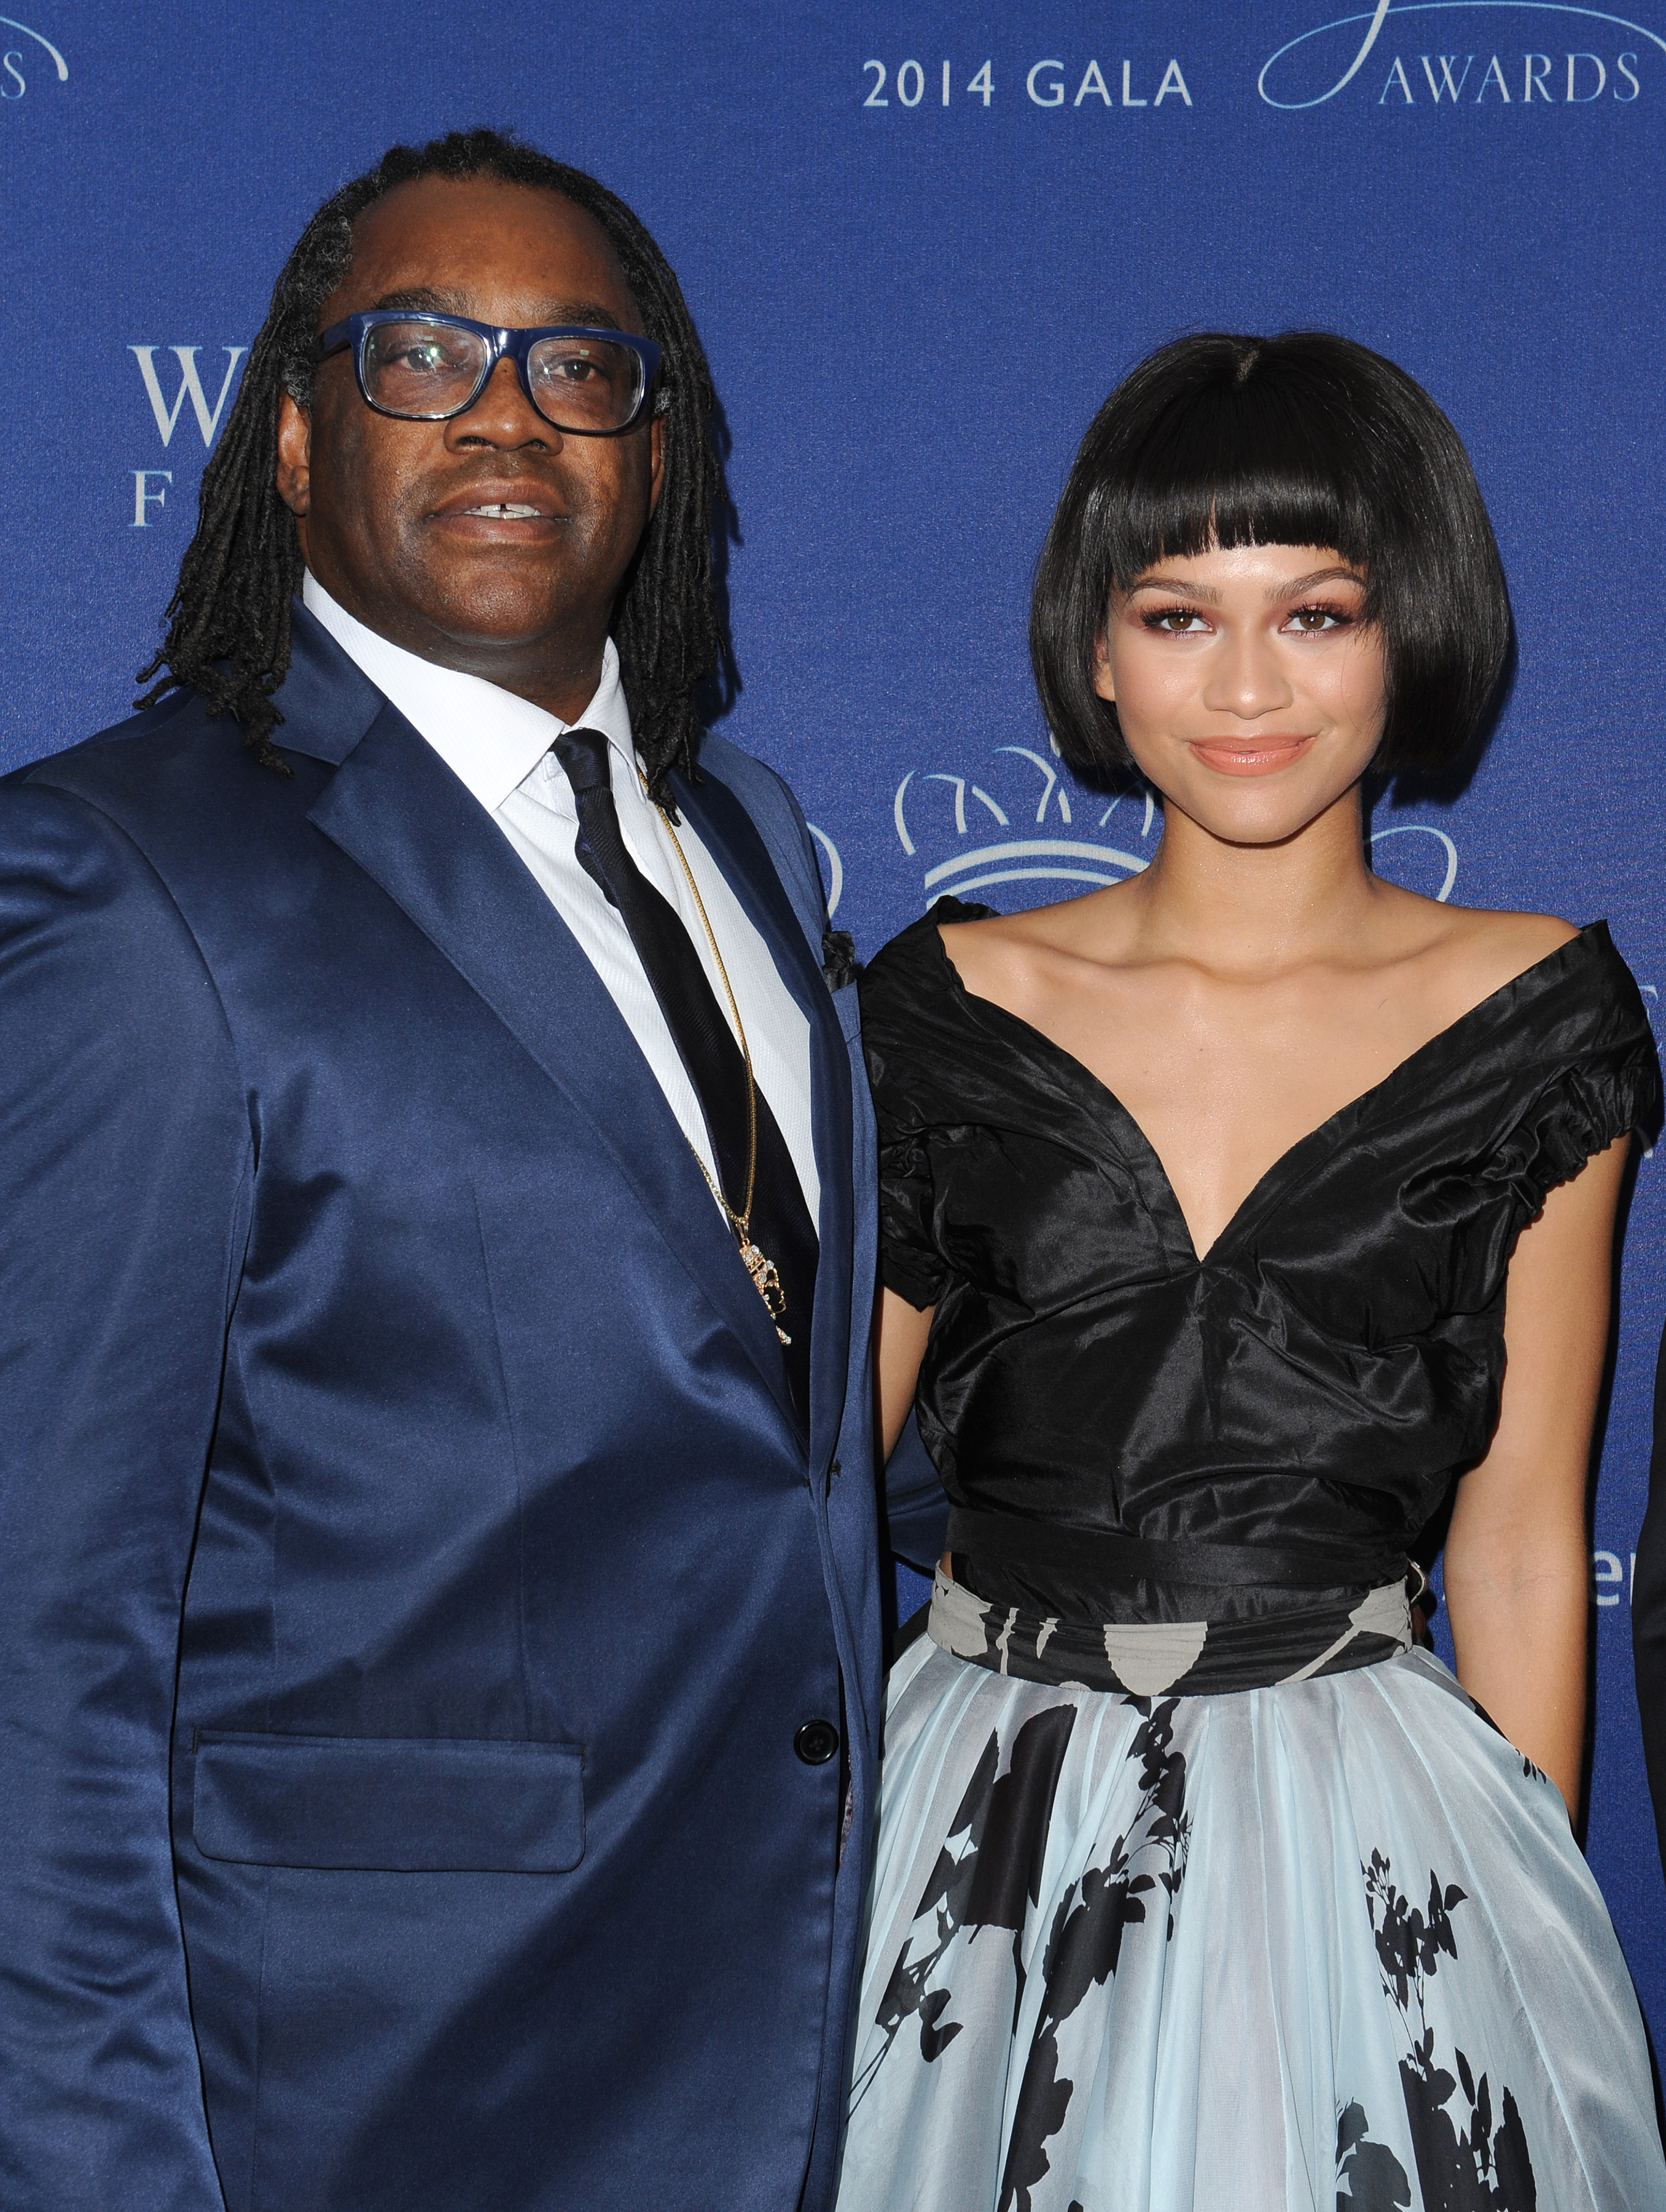 Zendaya and Kazembe Ajamu Coleman attend the Princess Grace Awards Gala in Beverly Hills, California,  on October 8, 2014. | Source: Getty Images